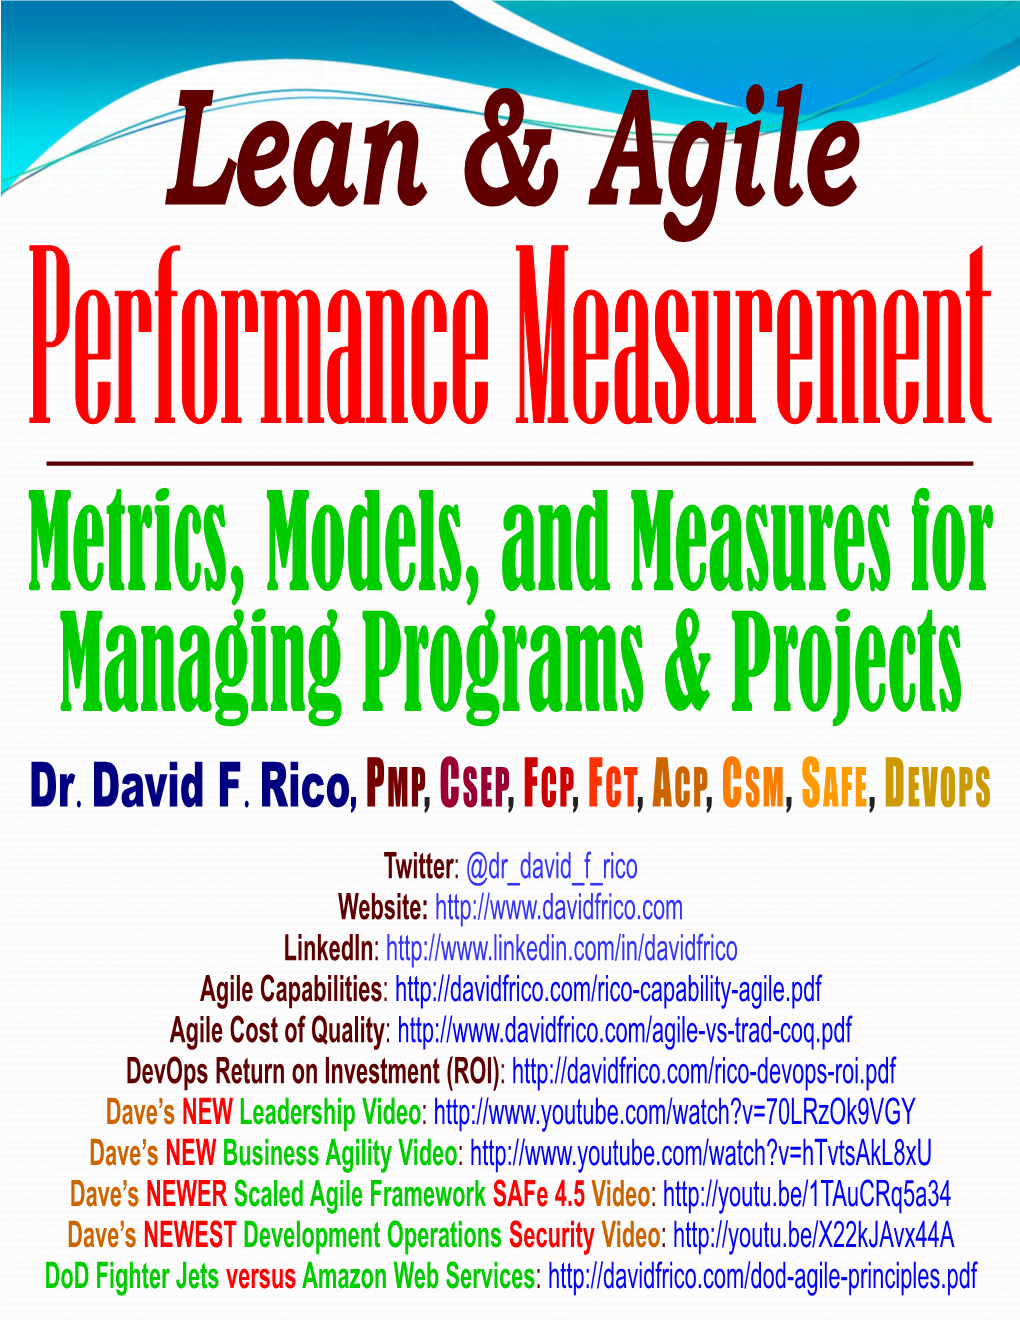 Metrics, Models, and Measures for Managing Programs & Projects